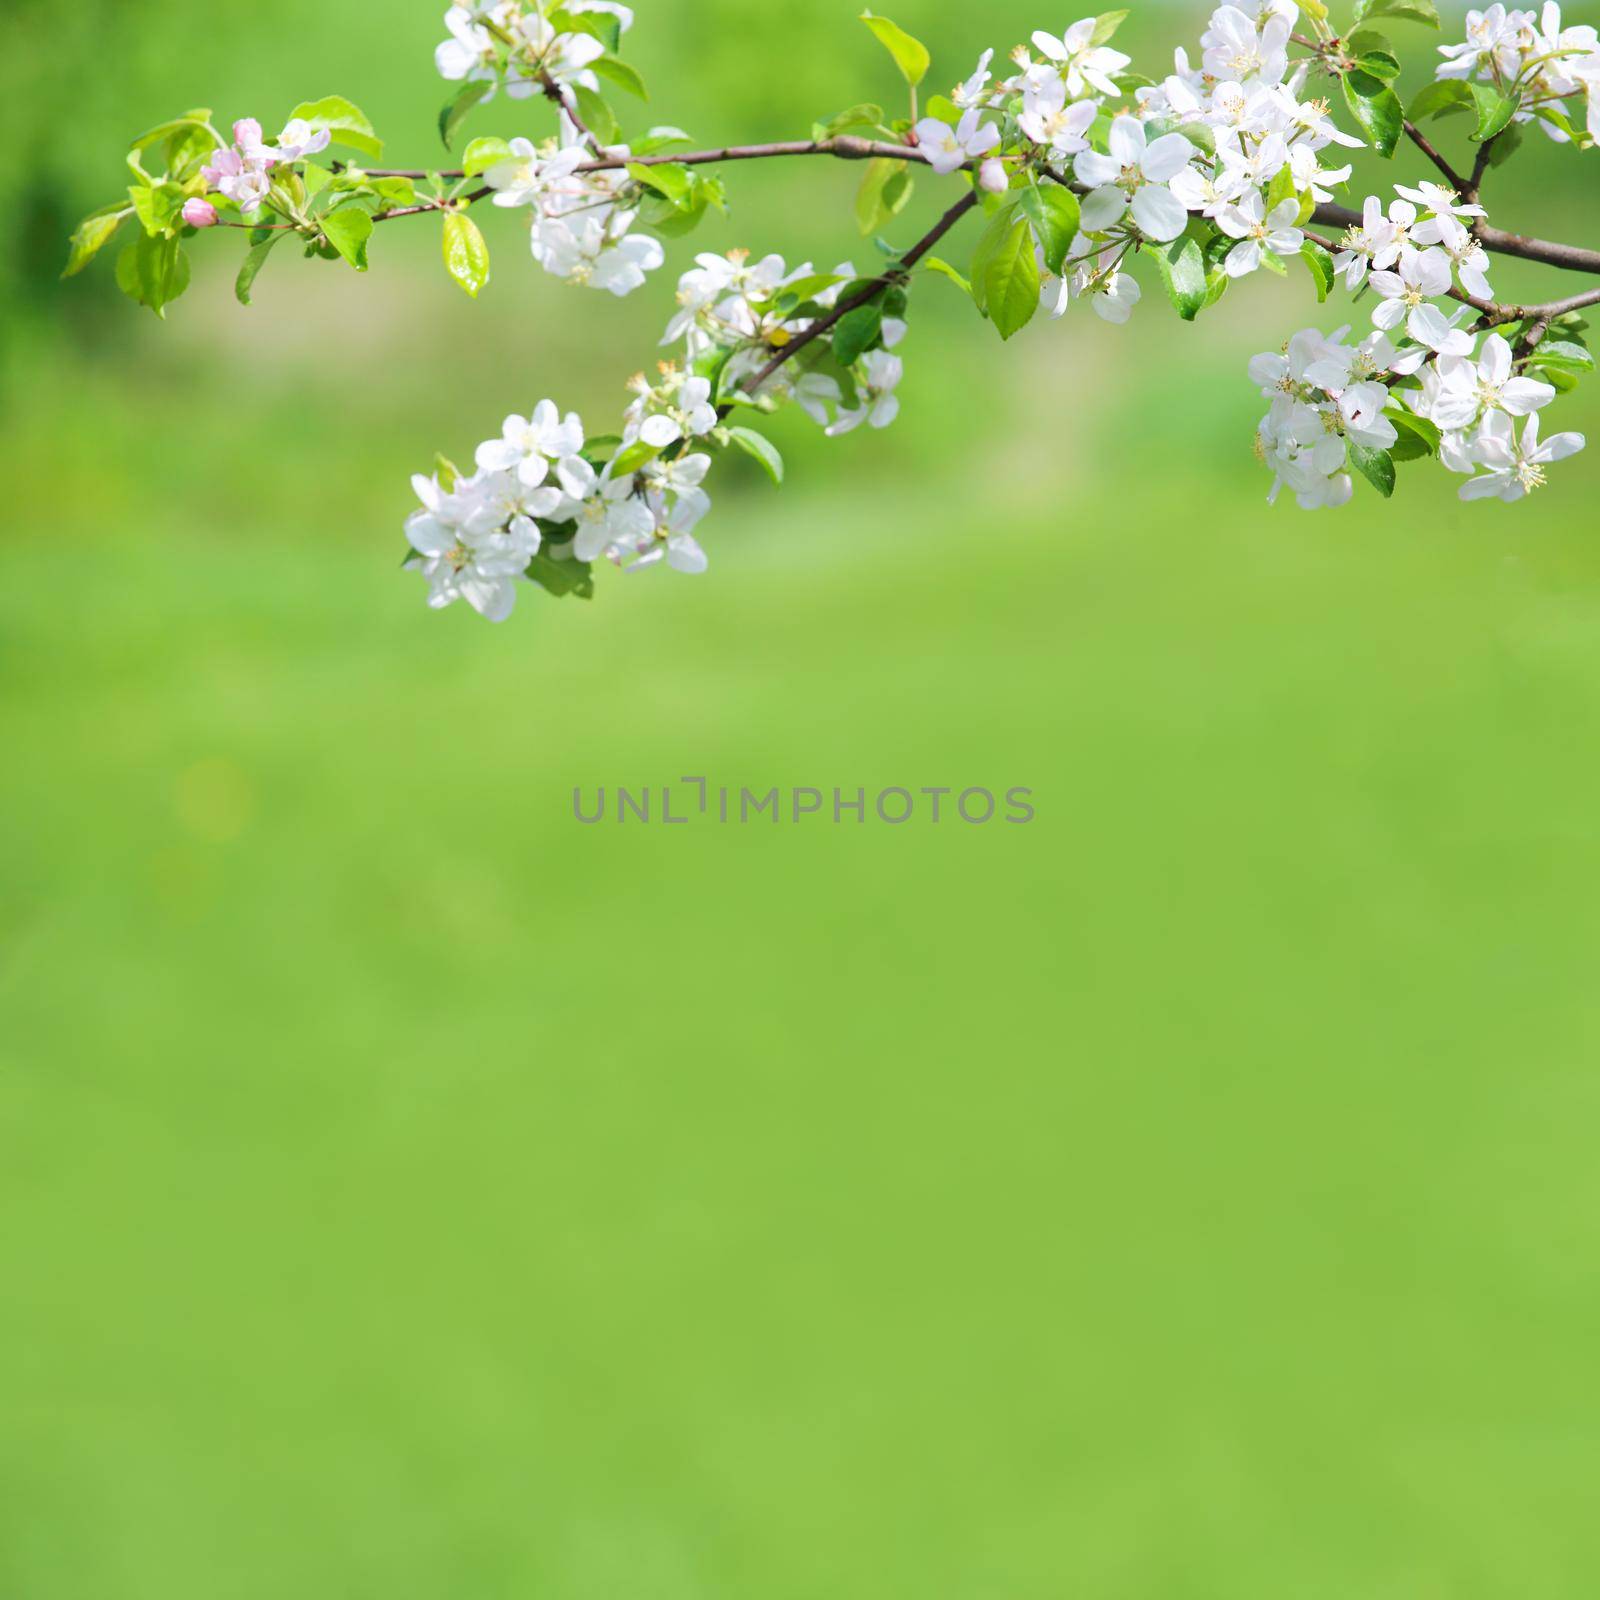 Blooming apple tree branch close up view spring background